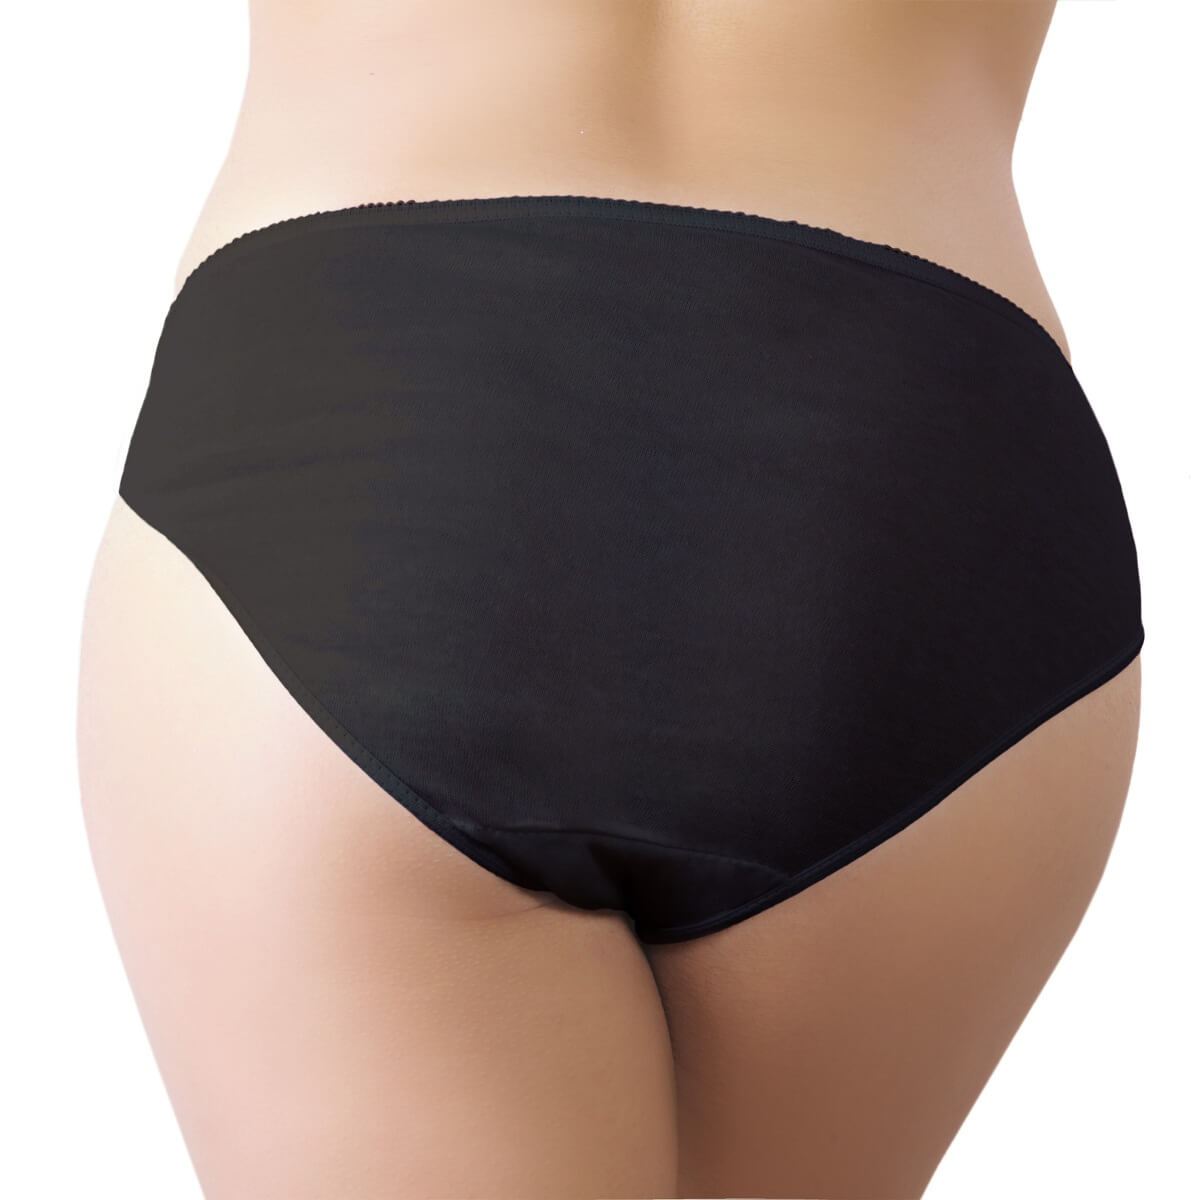 Large Cotton Maternity Bather Bottoms Disposable Underwear For Prenatal And  Postpartum Use Available In 4XL, 5XL 7XL 100KGMM Item #230512 From  Xianstore06, $11